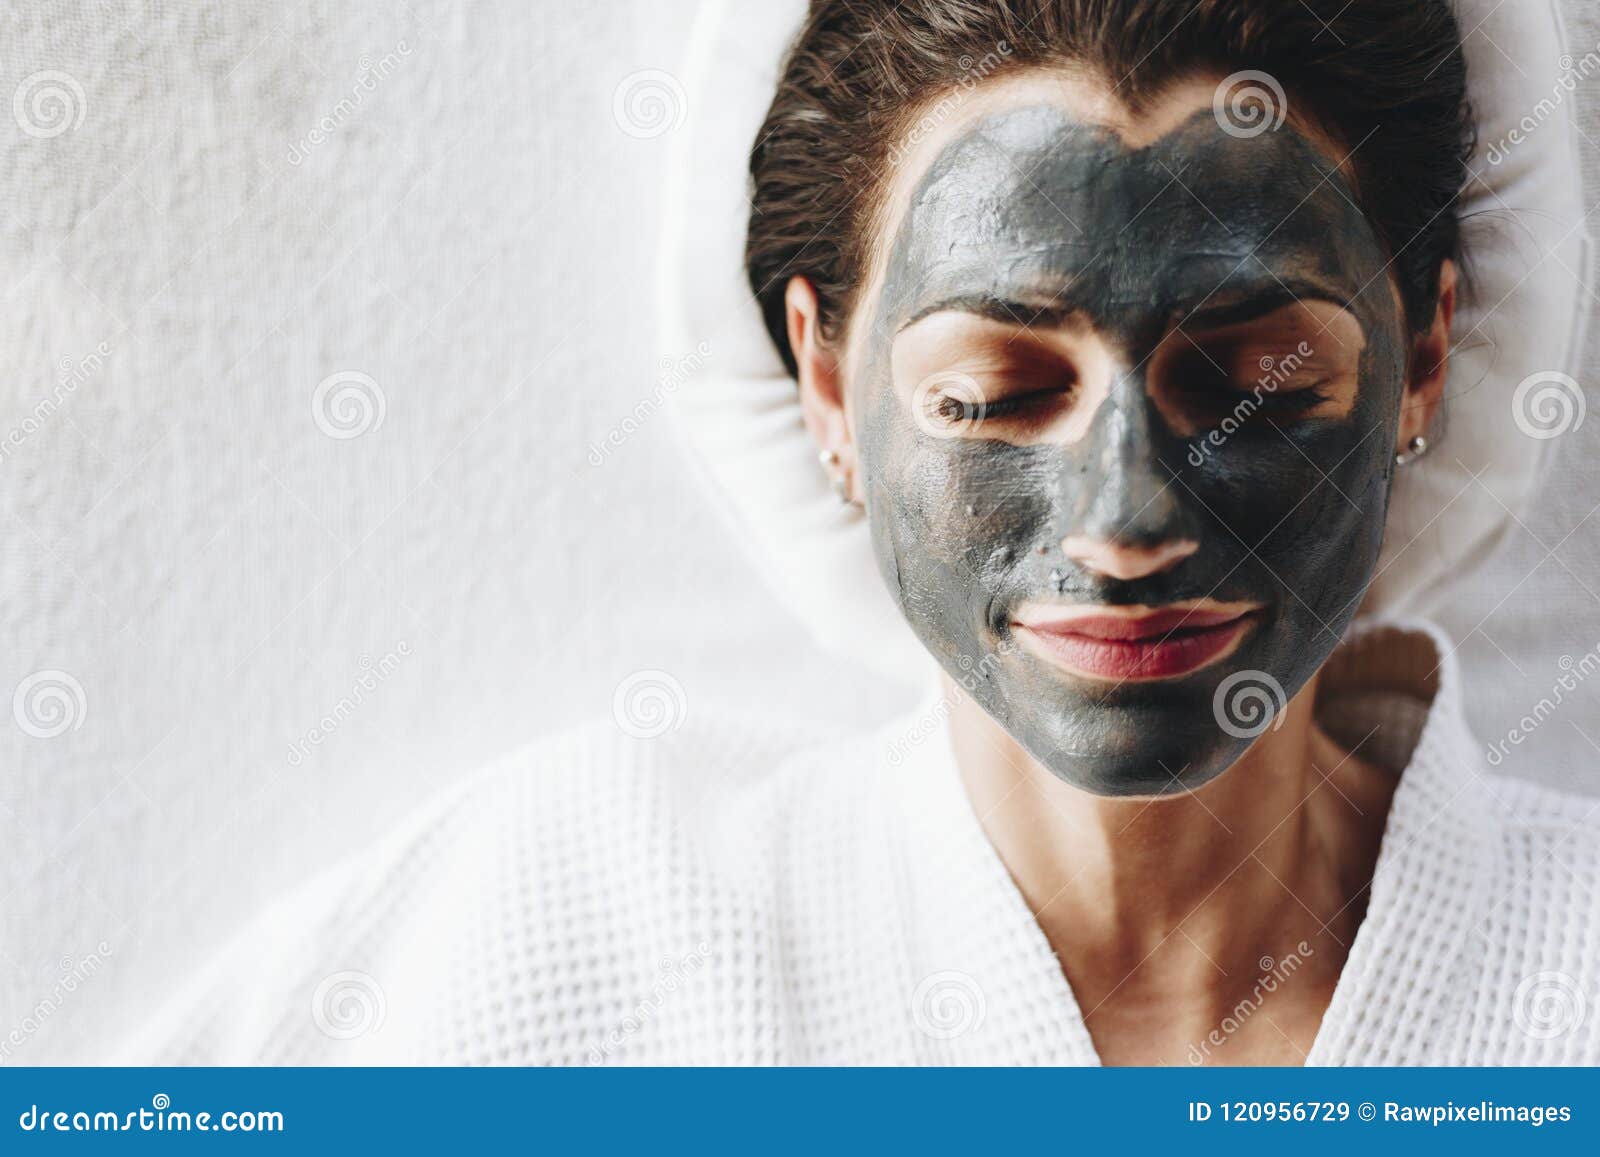 Woman Relaxing with a Charcoal Facial Mask Stock Image - Image of ...